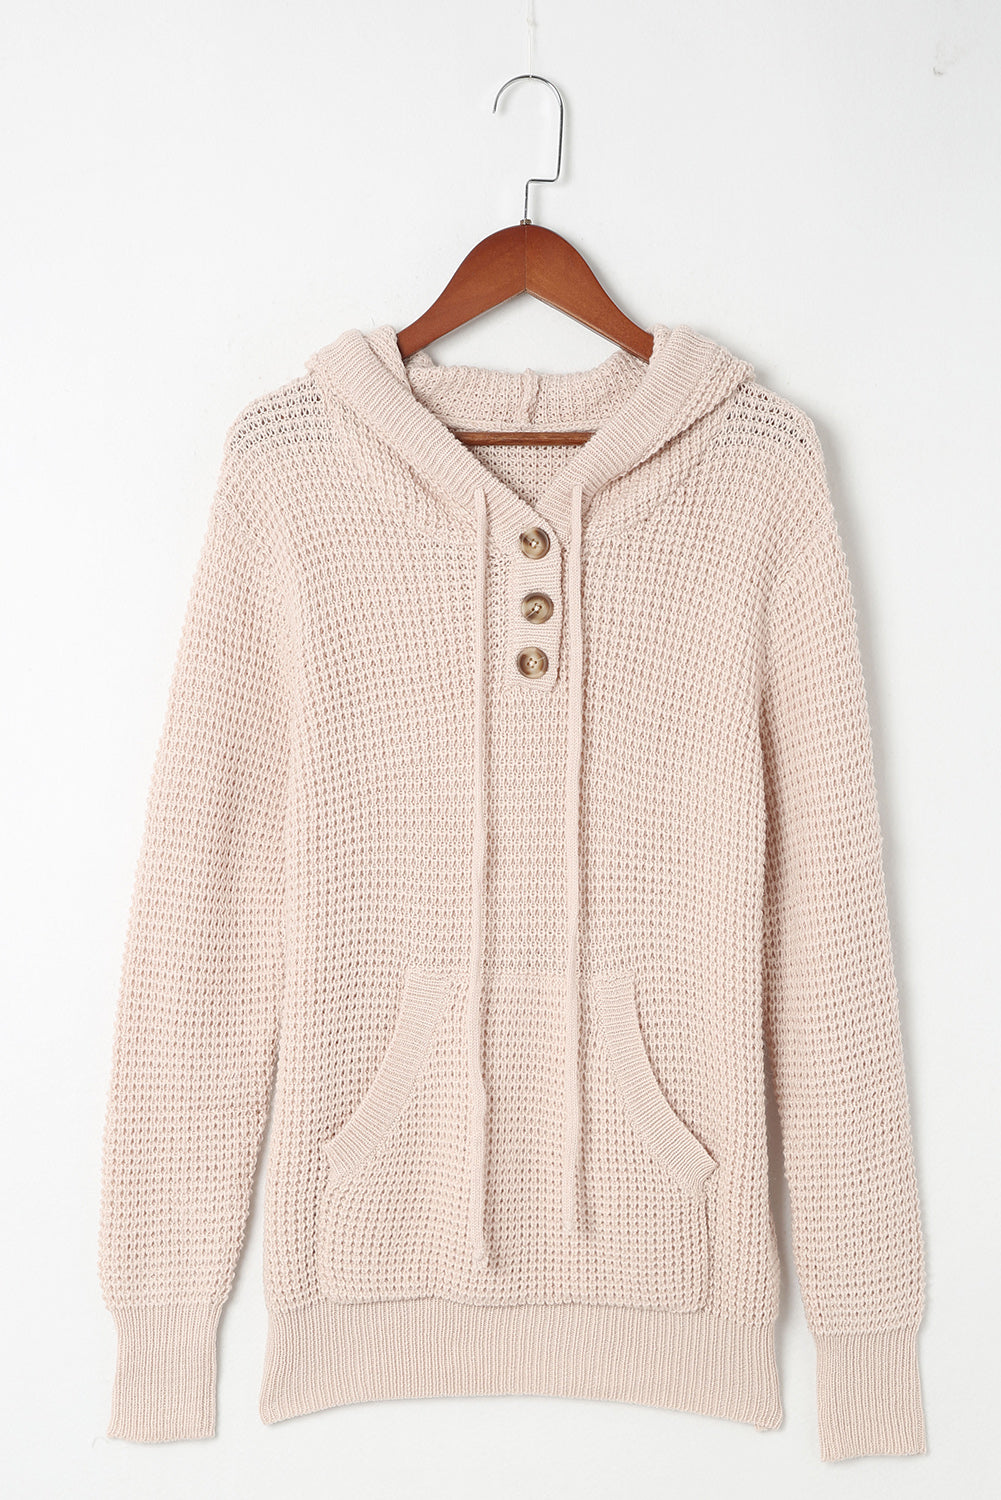 Apricot Waffle Knit Buttons Hooded Sweater with Pocket